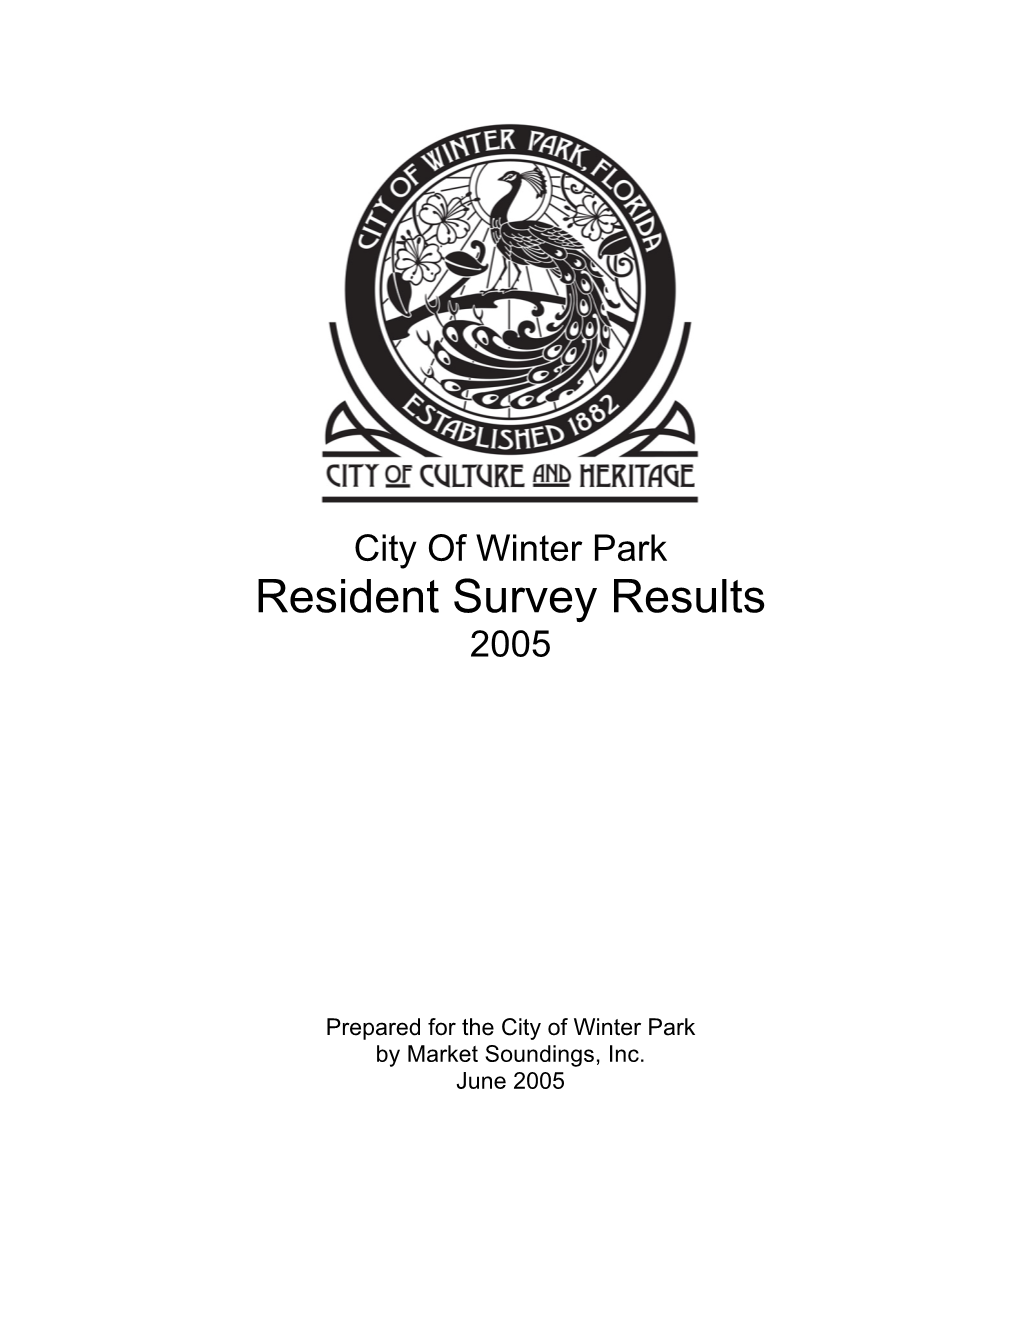 Resident Survey Results 2005